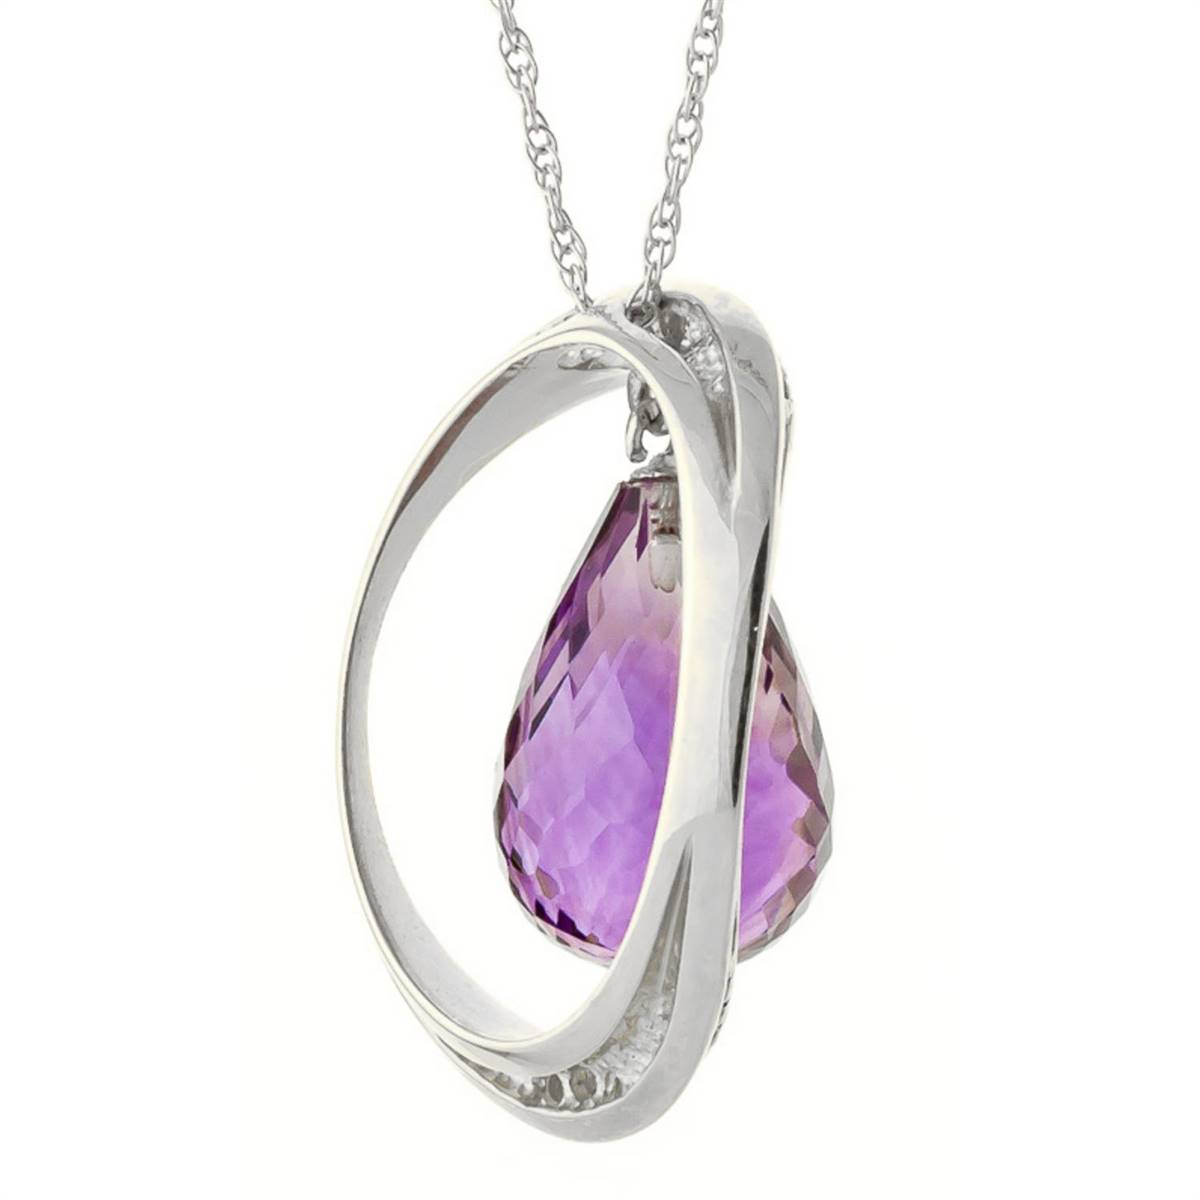 14K Solid White Gold Necklace w/ Natural Briolette Amethyst & Diamonds